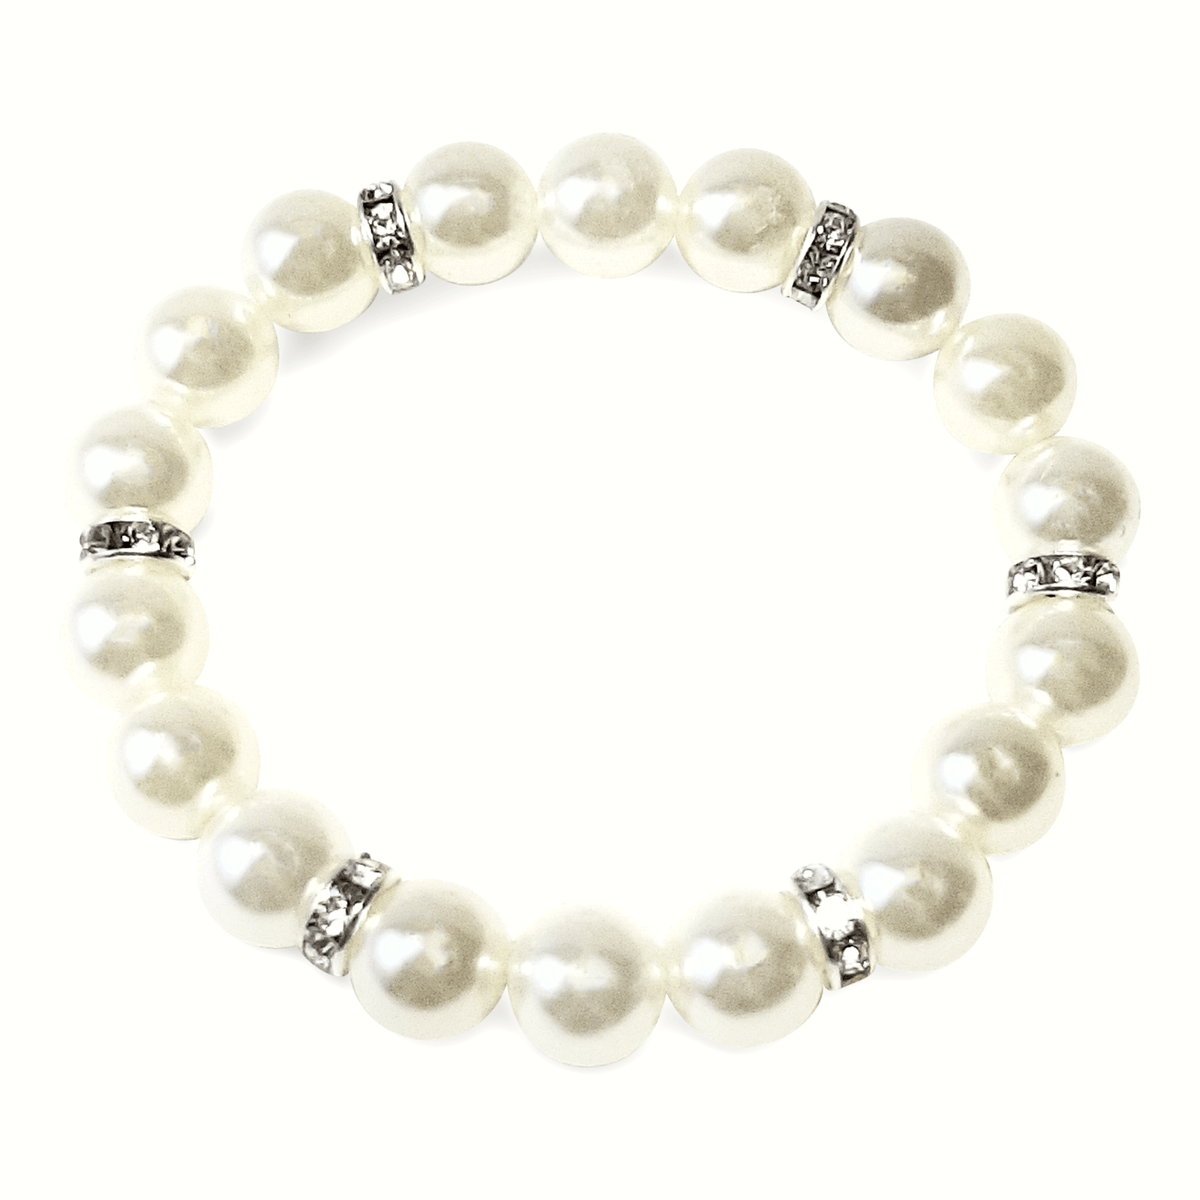 Ivory Simulated Pearl & Rhinestone Beaded Stretch Bracelet Bracelet A Moment Of Now Women’s Boutique Clothing Online Lifestyle Store